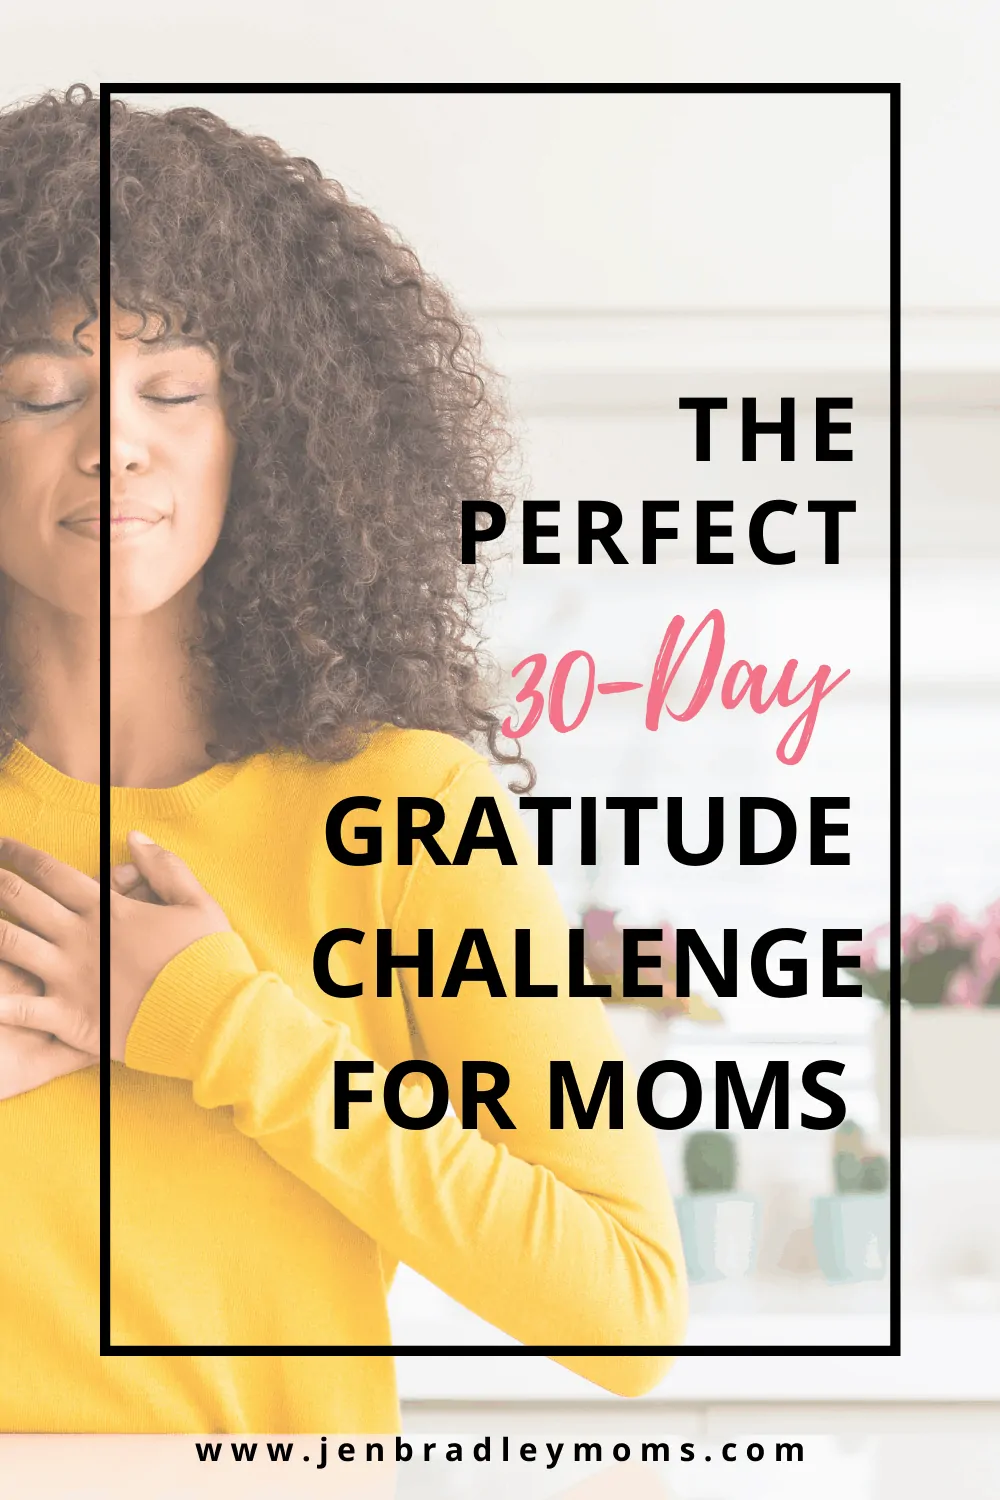 Try the Perfect 30-Day Gratitude Challenge for Moms